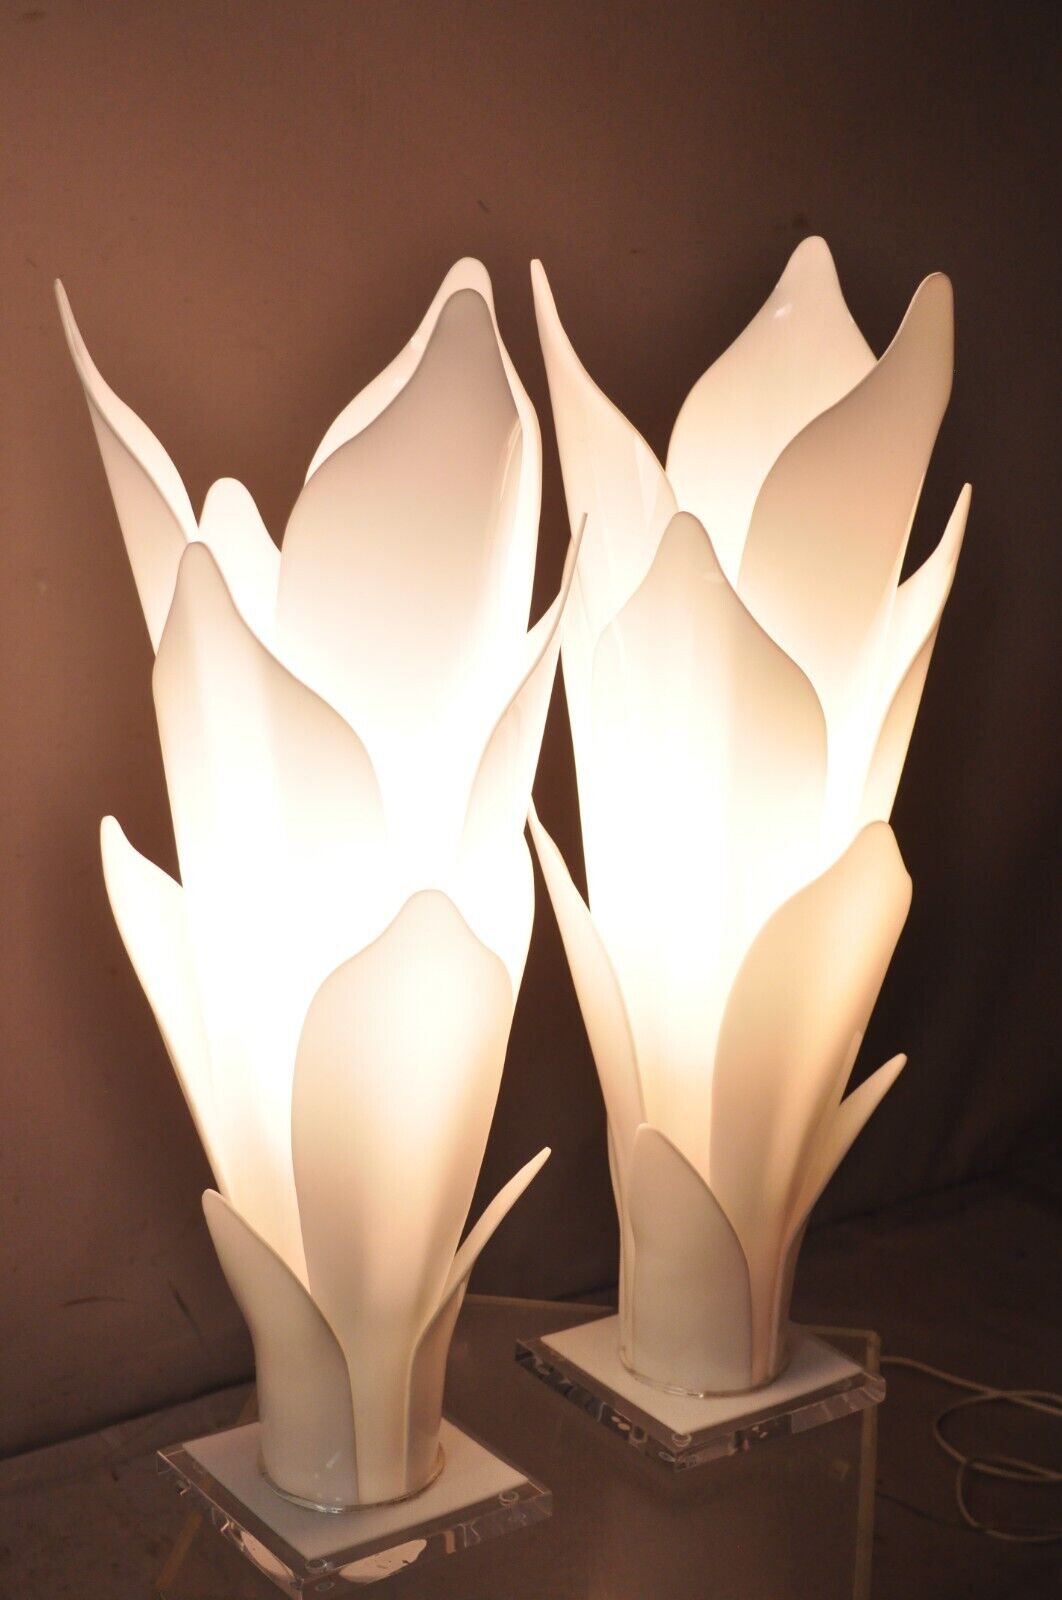 Rougier White Acrylic Lucite Tulip Flower Leaf Mid Century Table Lamps - a Pair